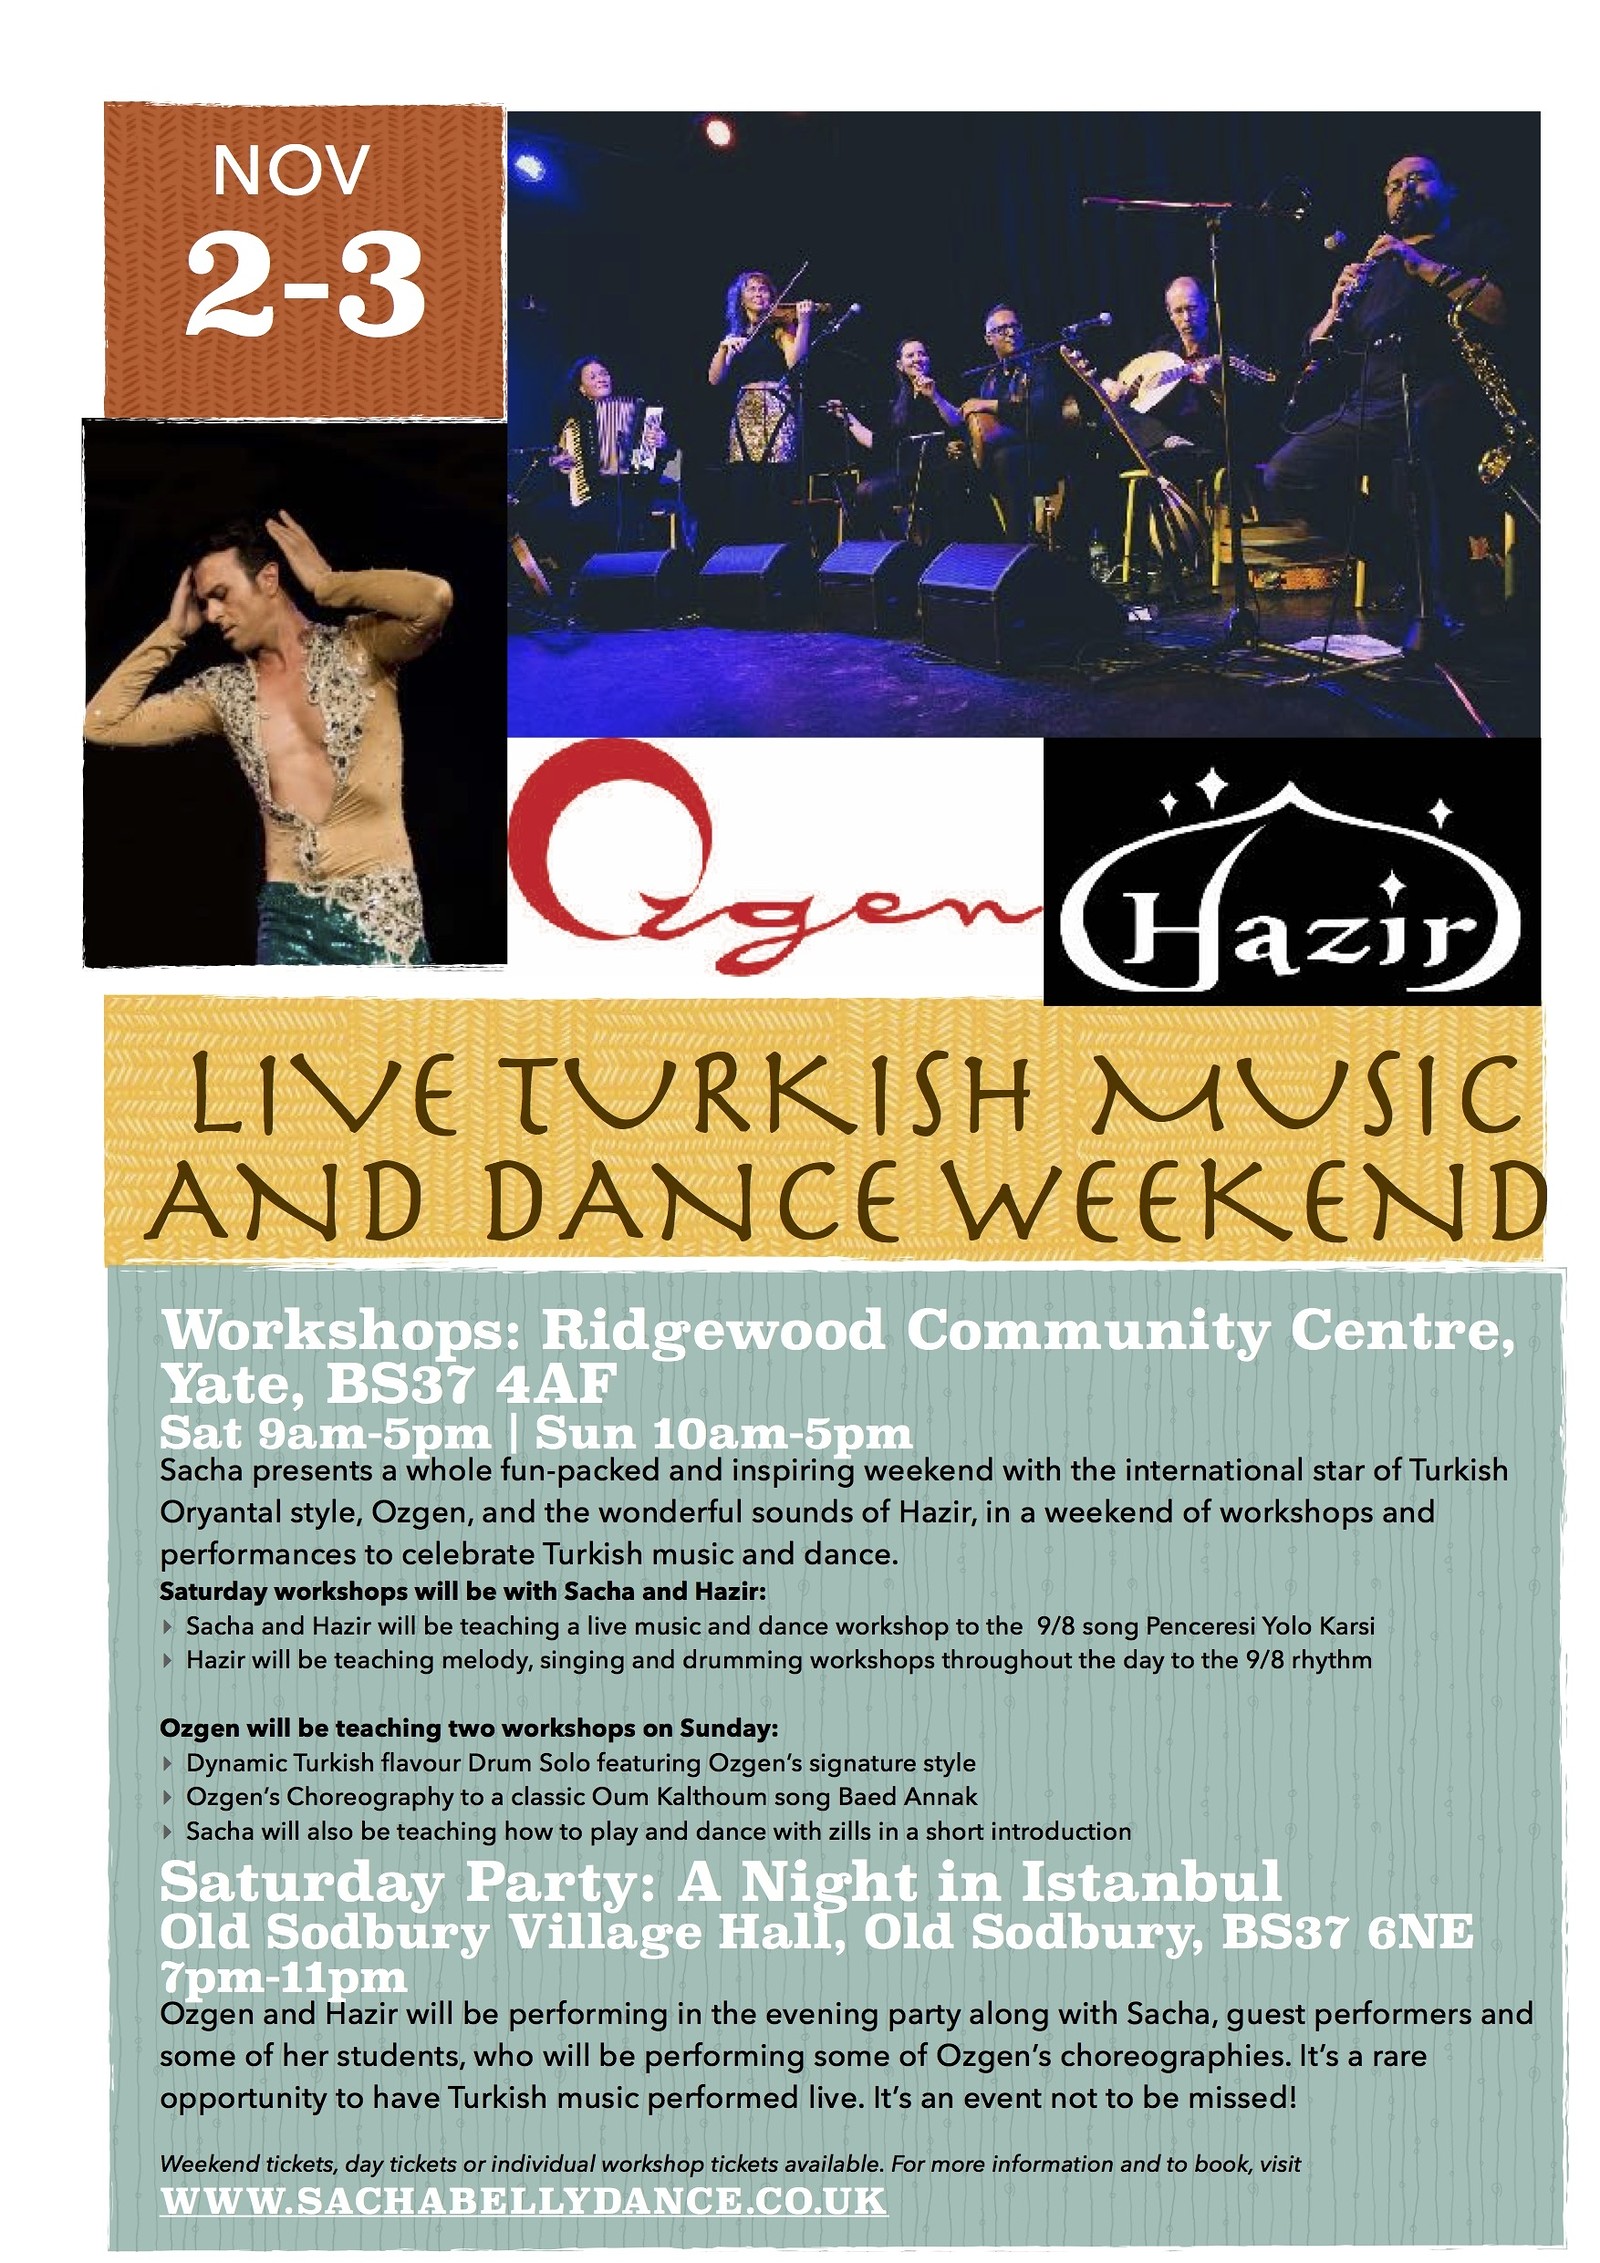 A Night in Istanbul: Turkish Music and Dance at Old Sodbury Village Hall